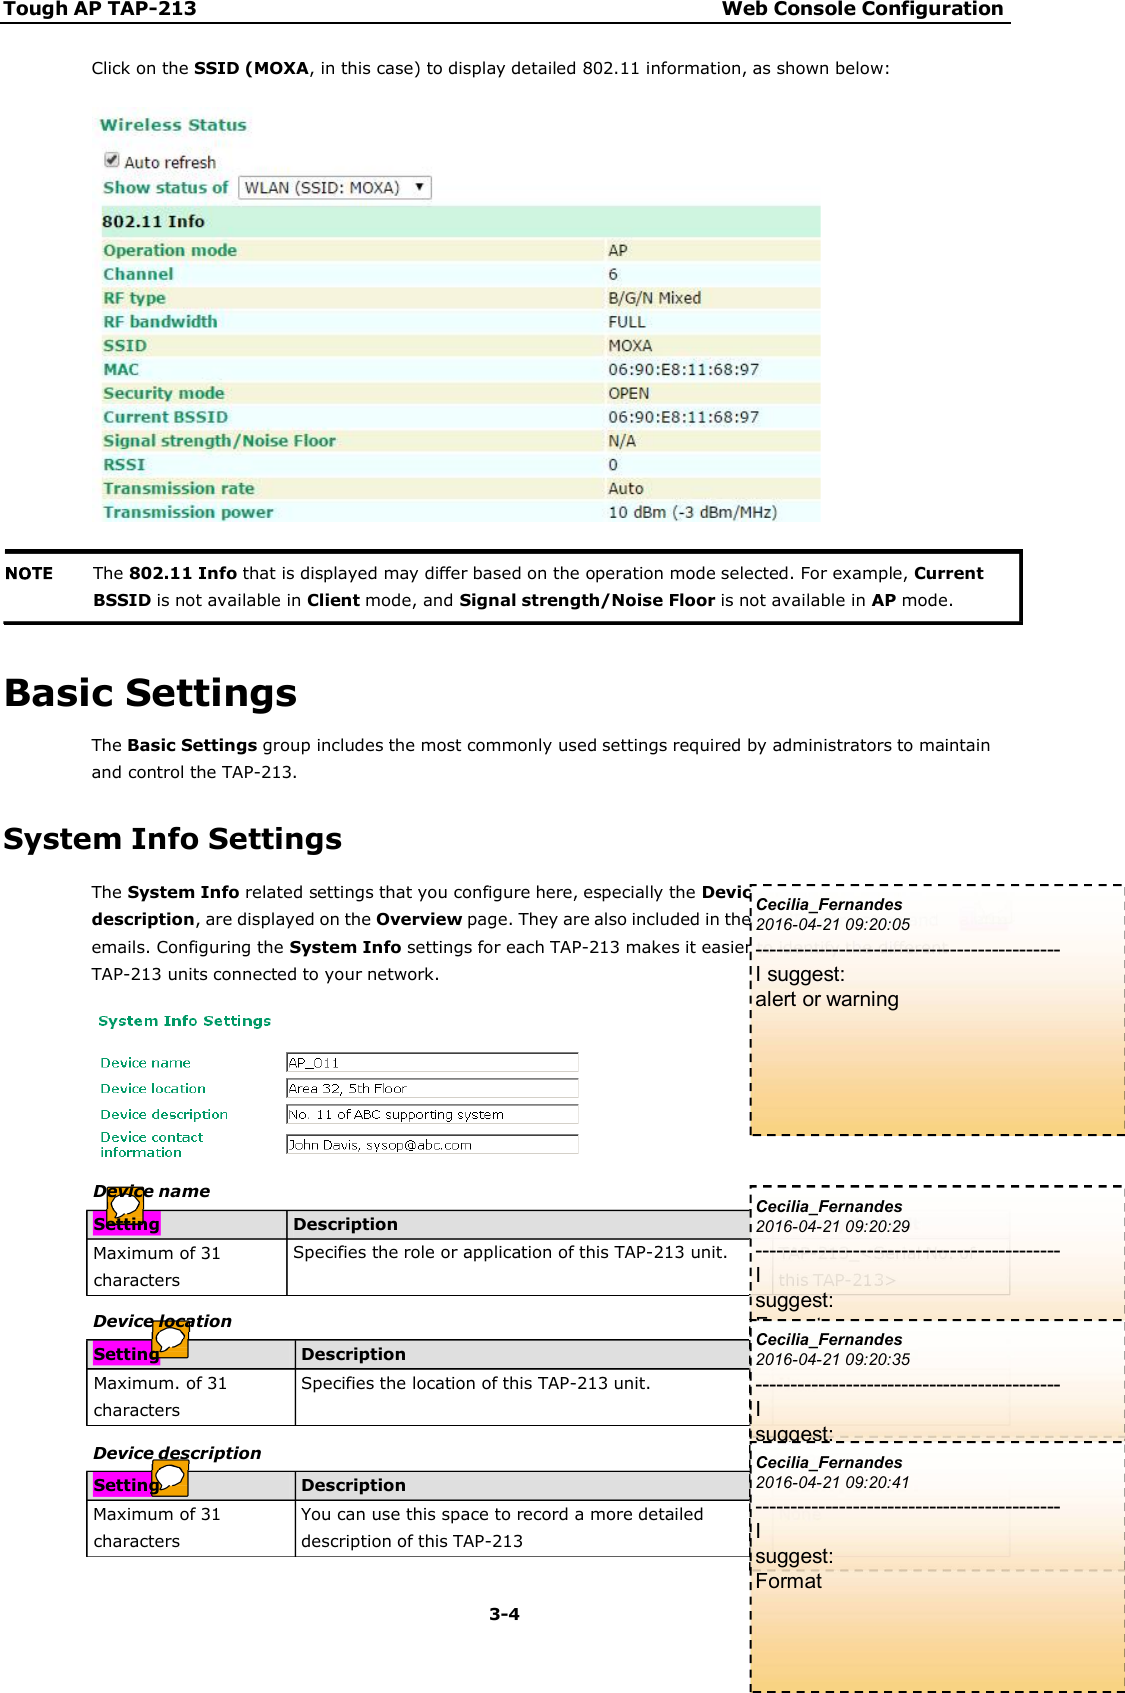 Tough AP TAP-213 Web Console Configuration 3-4    alarm  Click on the SSID (MOXA, in this case) to display detailed 802.11 information, as shown below:       Basic Settings The Basic Settings group includes the most commonly used settings required by administrators to maintain and control the TAP-213.  System Info Settings The System Info related settings that you configure here, especially the Device name and Device description, are displayed on the Overview page. They are also included in the SNMP information and emails. Configuring the System Info settings for each TAP-213 makes it easier to identify the different TAP-213 units connected to your network.         The 802.11 Info that is displayed may differ based on the operation mode selected. For example, CurrentBSSID is not available in Client mode, and Signal strength/Noise Floor is not available in AP mode. Setting Description Factory Default Maximum of 31characters Specifies the role or application of this TAP-213 unit.  TAP-213_&lt;Serial No. ofthis TAP-213&gt; Device name Setting Description Factory Default Maximum. of 31characters Specifies the location of this TAP-213 unit.  None Device location Setting Description Factory Default Maximum of 31characters You can use this space to record a more detaileddescription of this TAP-213 None Device description Cecilia_Fernandes 2016-04-21 09:20:05 -------------------------------------------- I suggest: alert or warning Cecilia_Fernandes 2016-04-21 09:20:29 -------------------------------------------- I suggest: Format Cecilia_Fernandes 2016-04-21 09:20:35 -------------------------------------------- I suggest: Format Cecilia_Fernandes 2016-04-21 09:20:41 -------------------------------------------- I suggest: Format 